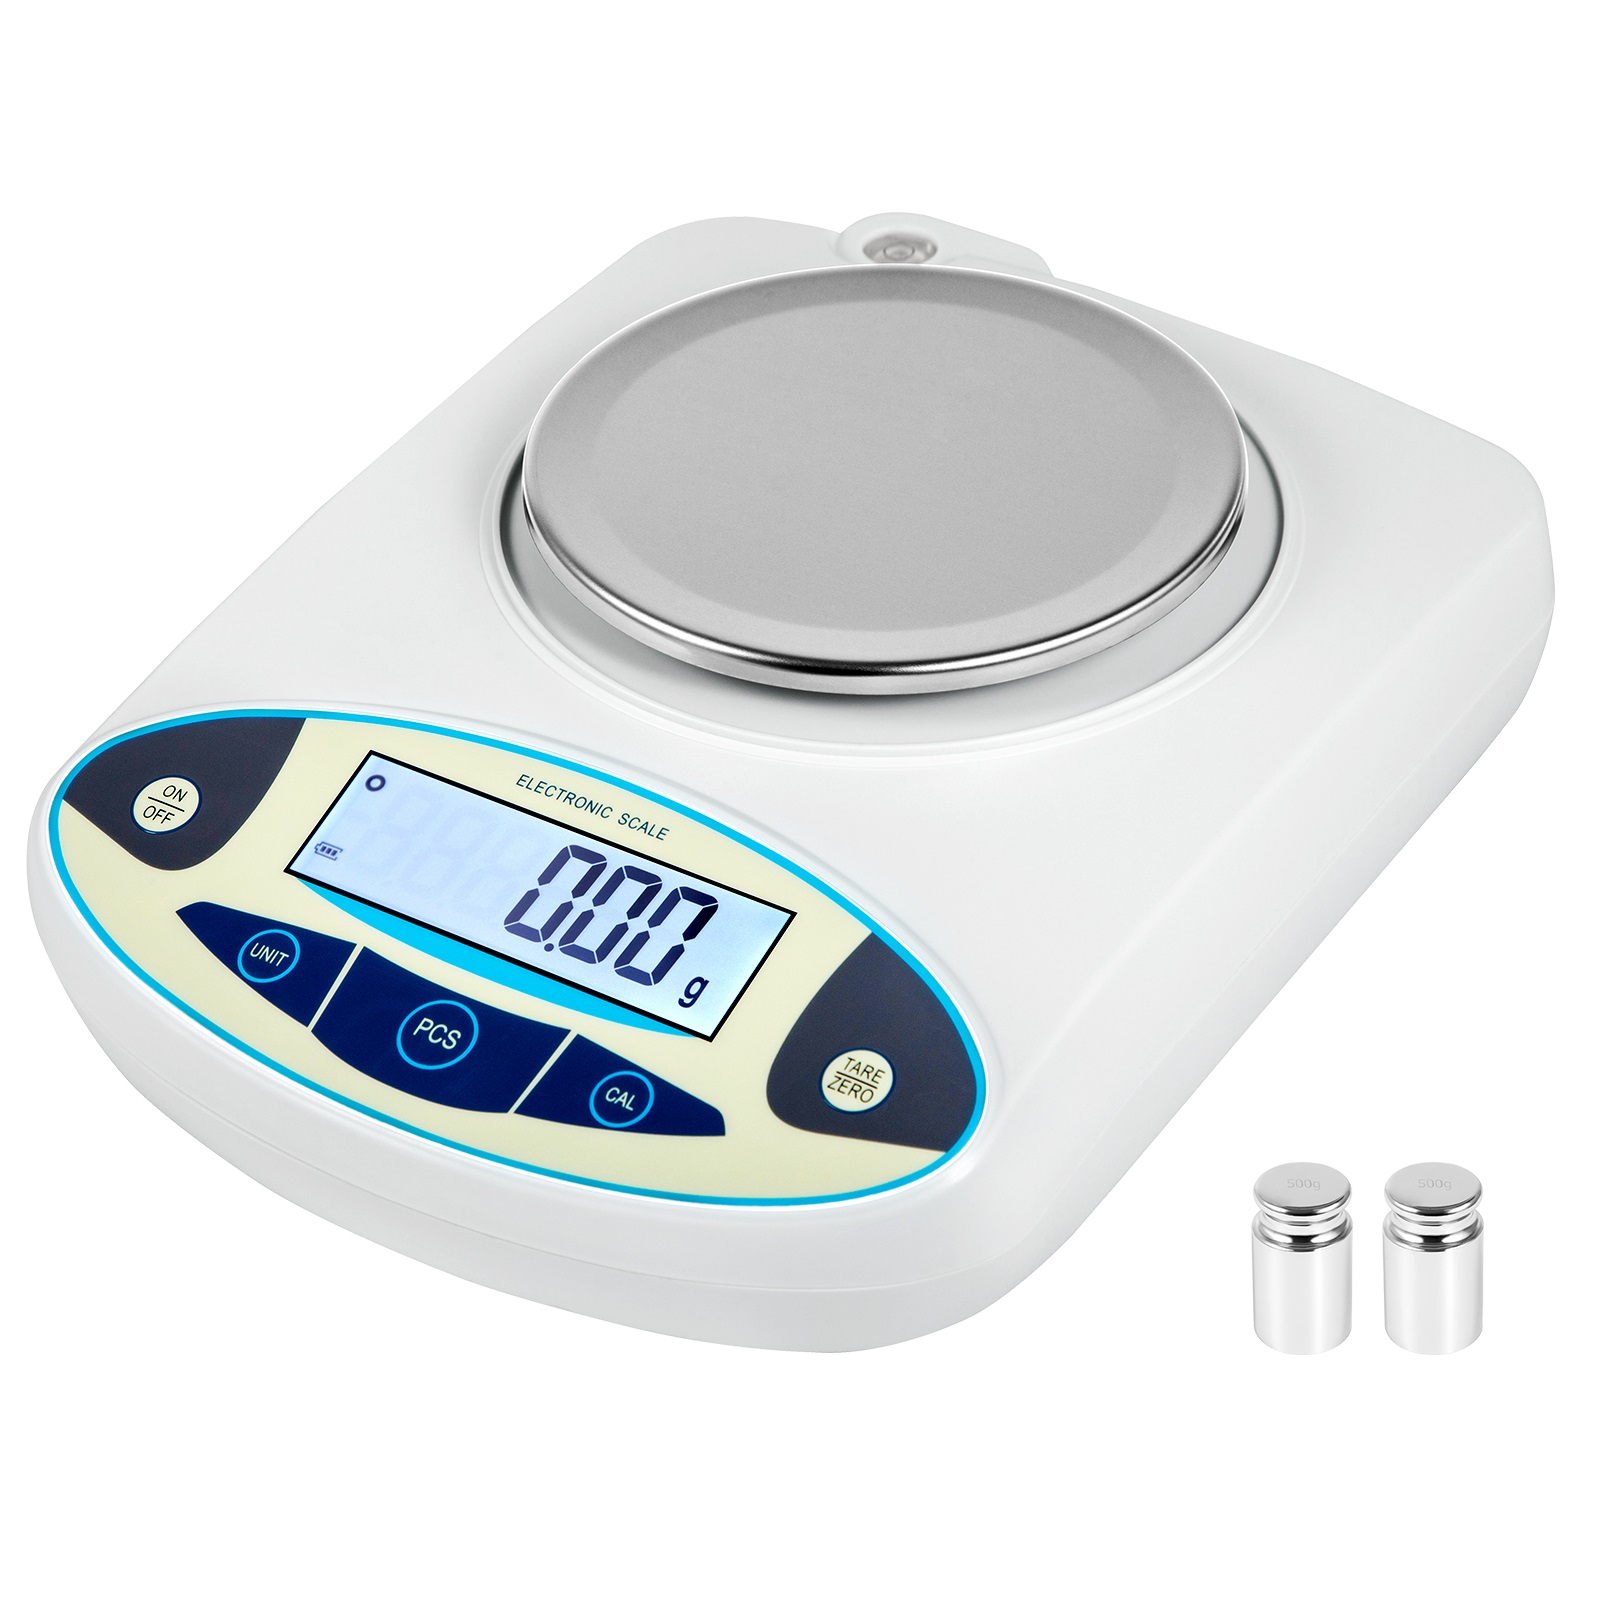  CGOLDENWALL Precision Lab Scale Digital Analytical Balance  Laboratory Balance Jewelry Scale Scientific Scale 0.01g Accuracy 110V  (5000g, 0.01g) : Industrial & Scientific